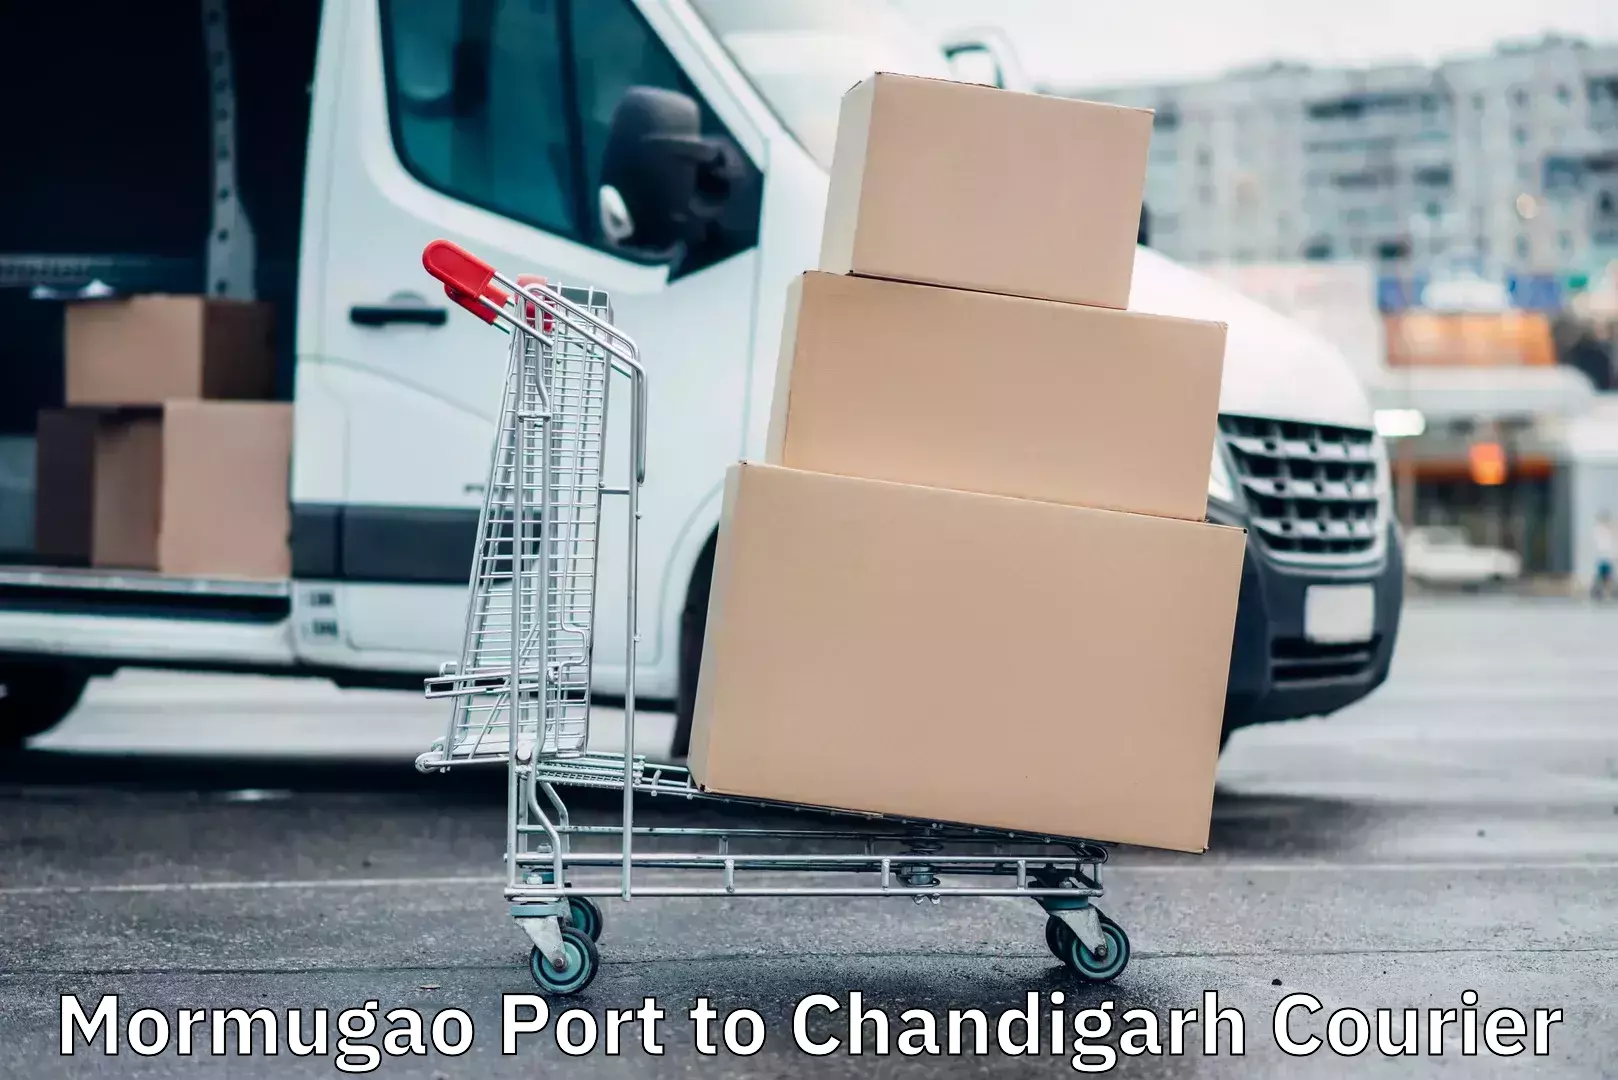 Large package courier Mormugao Port to Chandigarh